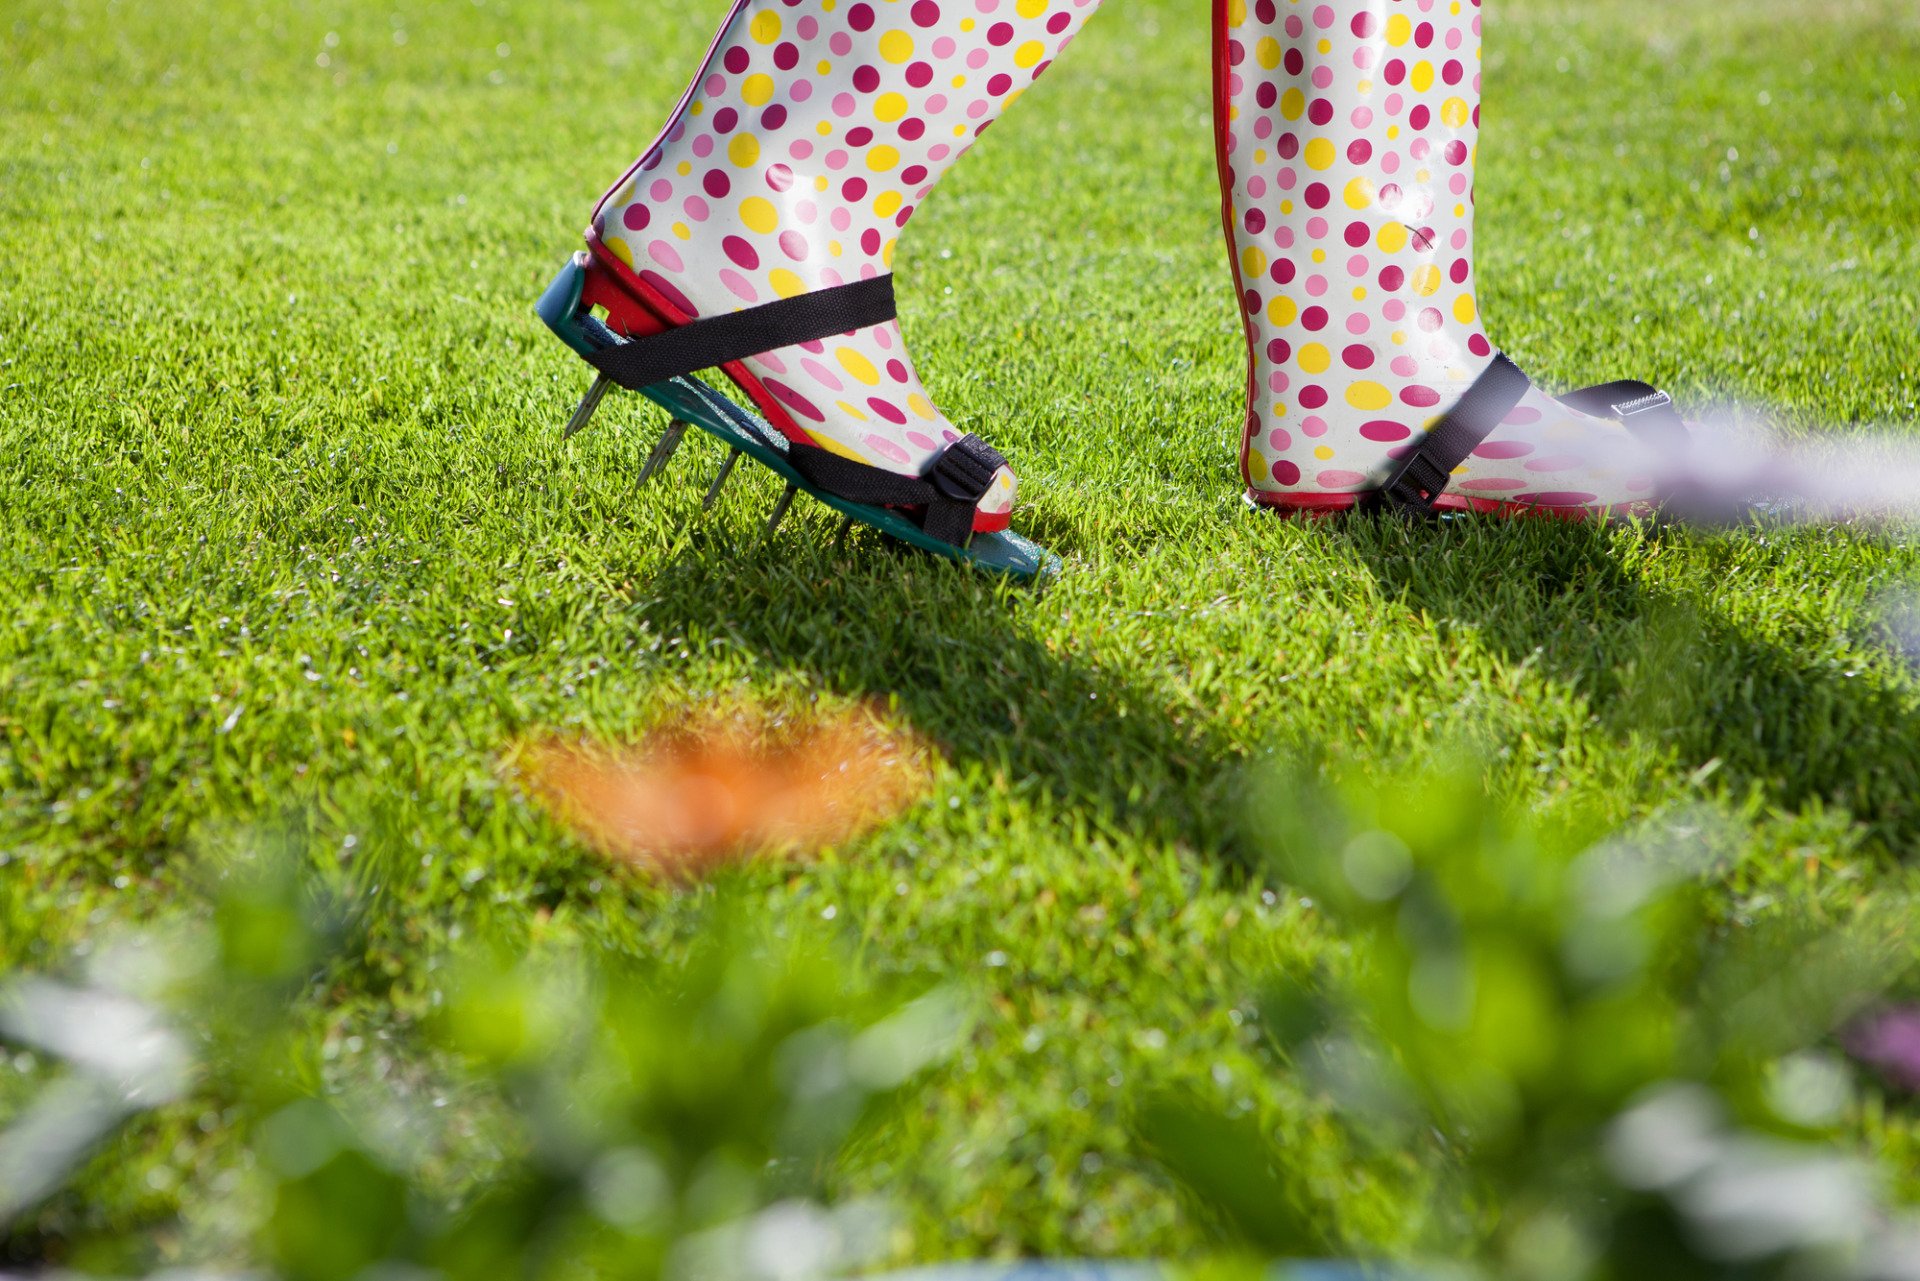 aerating a lawn - autumn lawn care